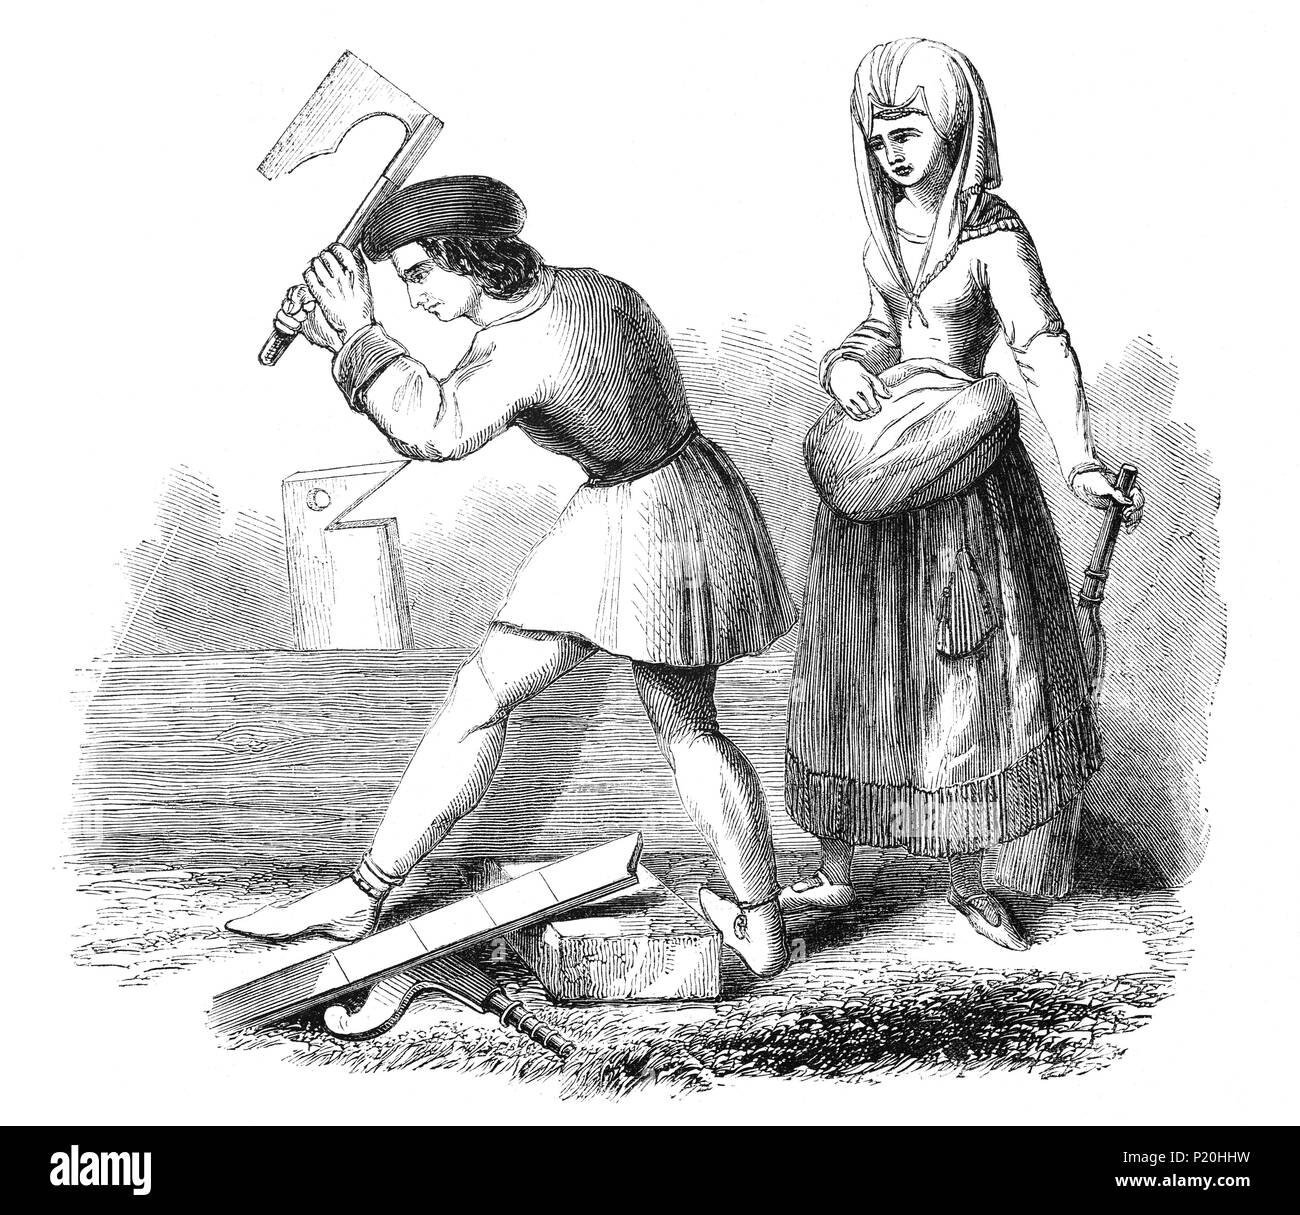 A French maid-servant and Carpenter, possibly one of those who fought against the  butcchers during the Cabochien revolt, an episode in the civil war between the Armagnacs and the Burgundians in the spring of 1413, when John the Fearless, duke of Burgundy, managed to raise the people of Paris. Stock Photo